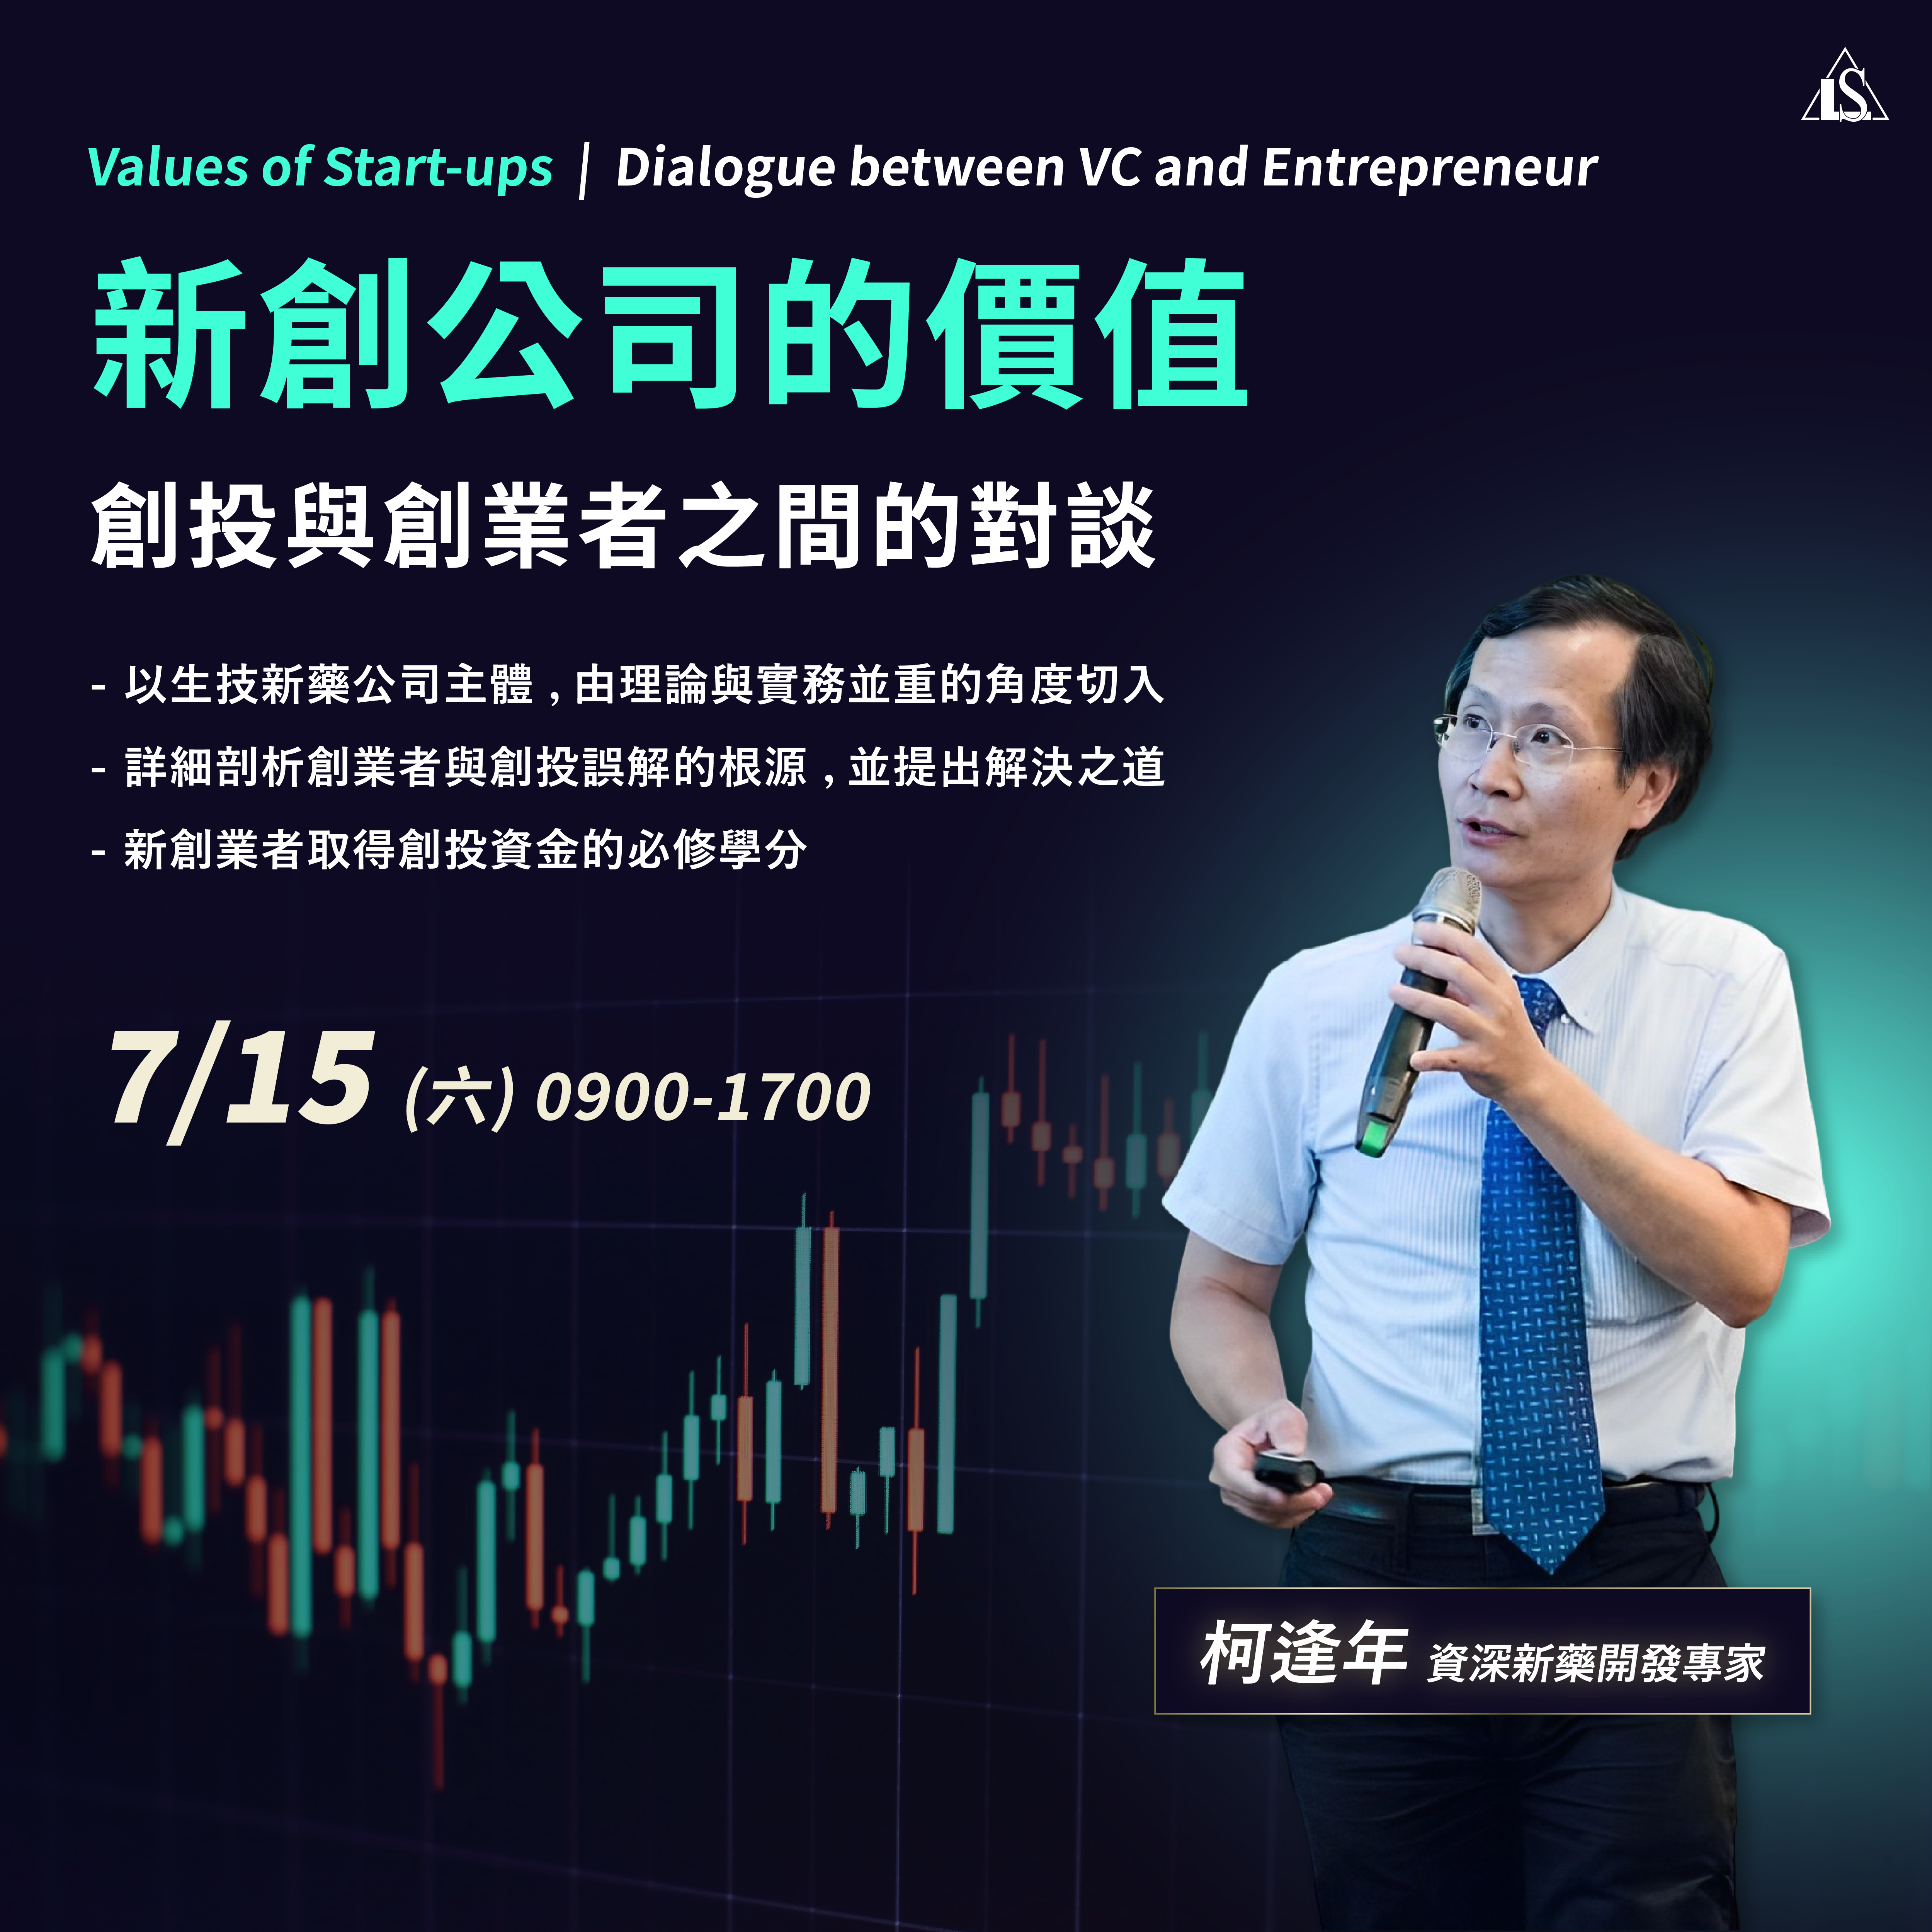 You are currently viewing <已截止> 2023/7/15 (星期六)【新藥開發系列】新創公司的價值：創投與創業者之間的對談  Values of Start-ups : Dialogue between VC and Entrepreneur